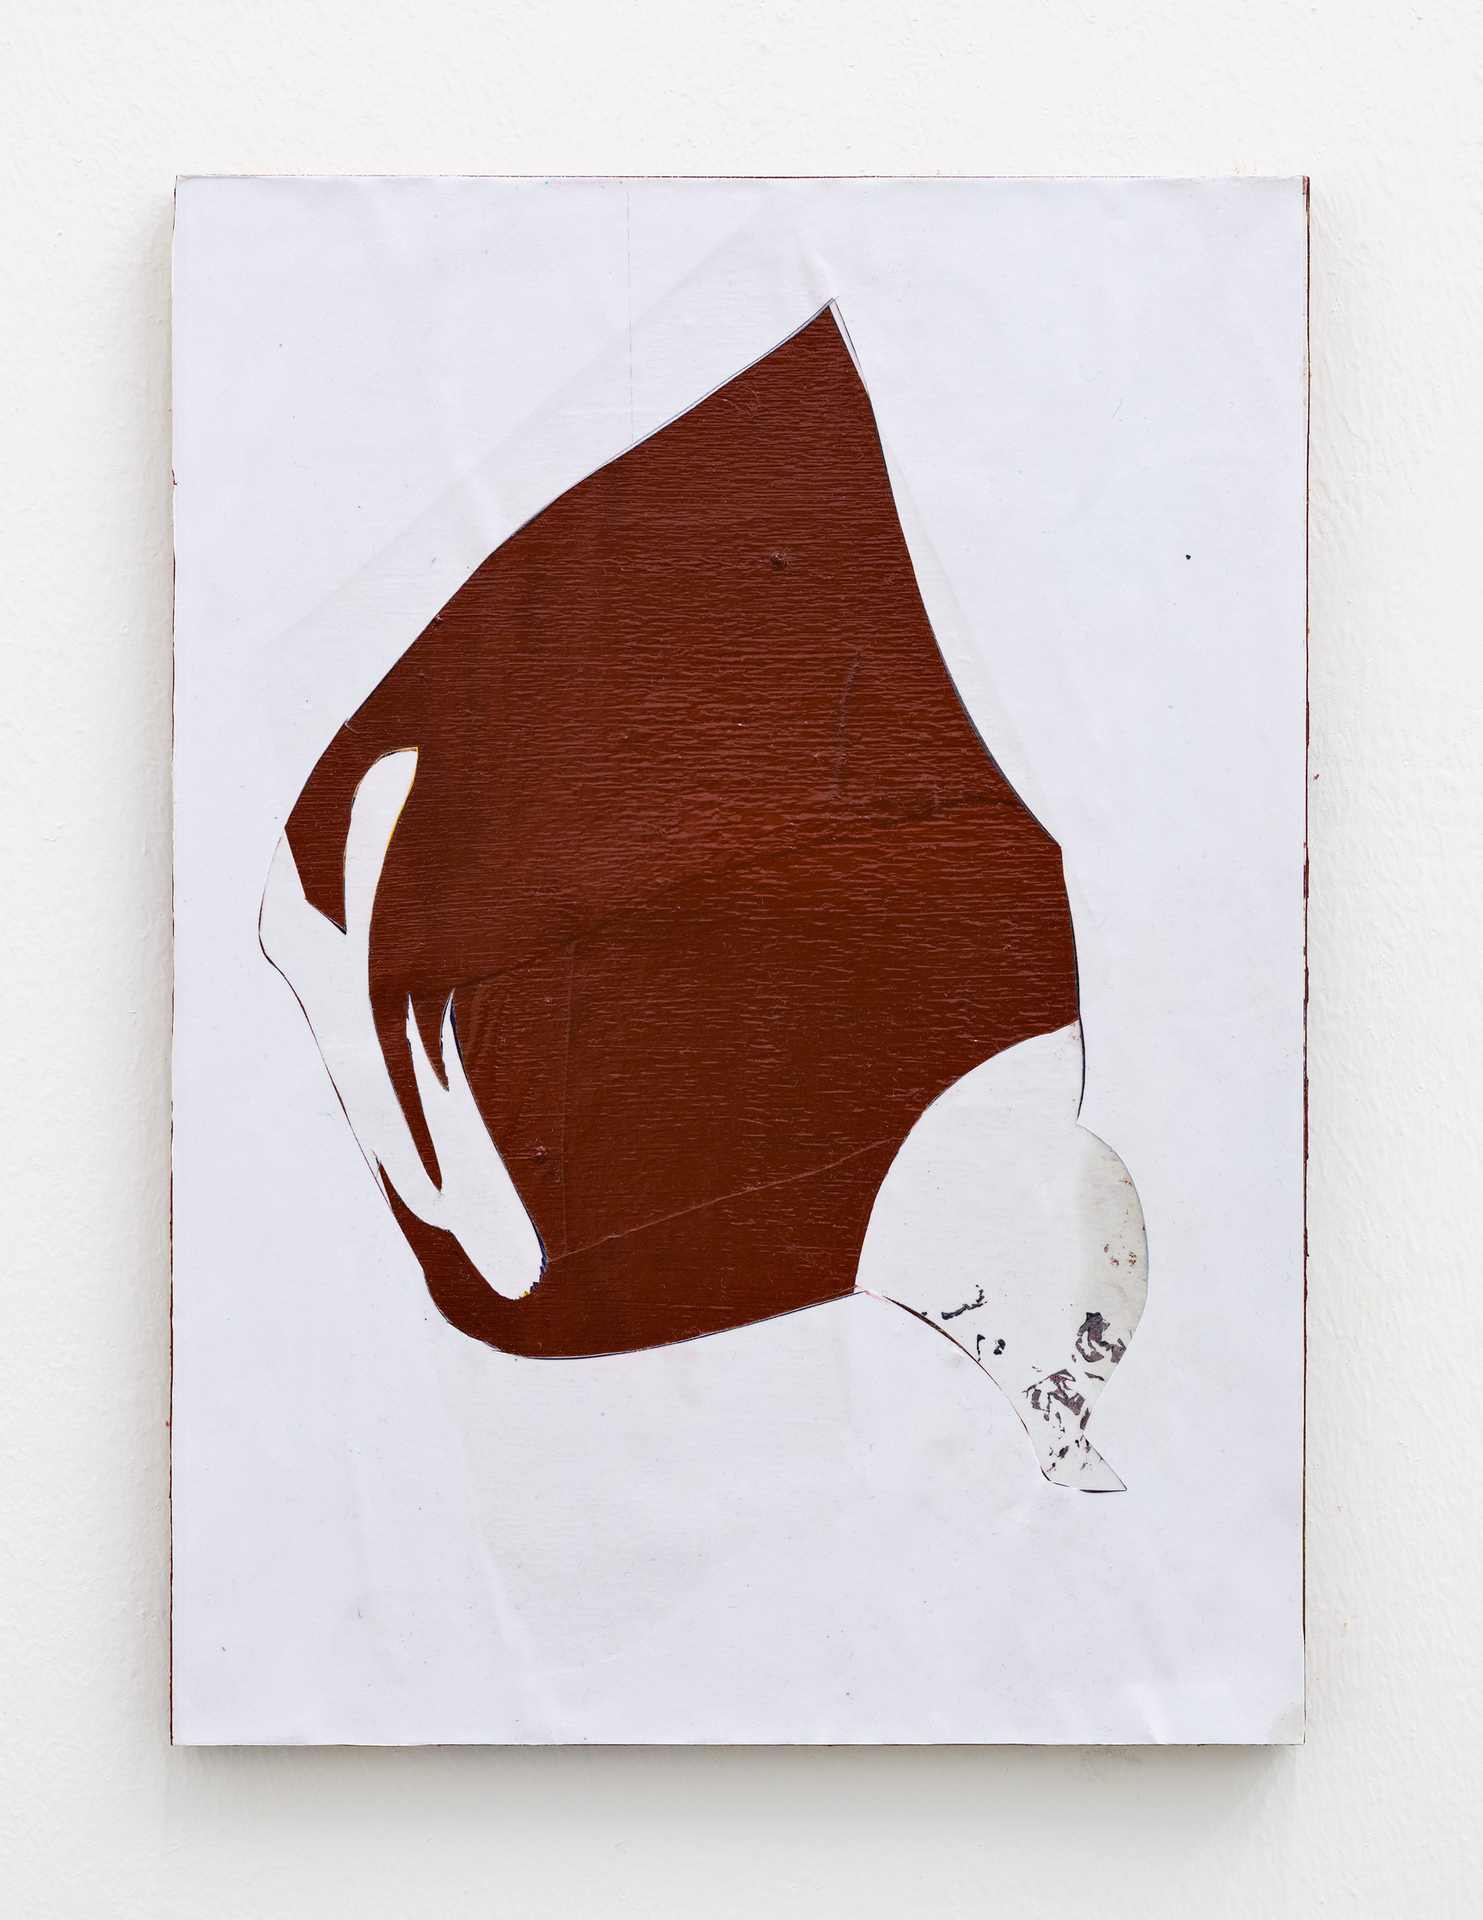 Stefan Reiterer Untitled (from the series 'images'), 2020 Oil and paper on MDF 30 x 21 cm